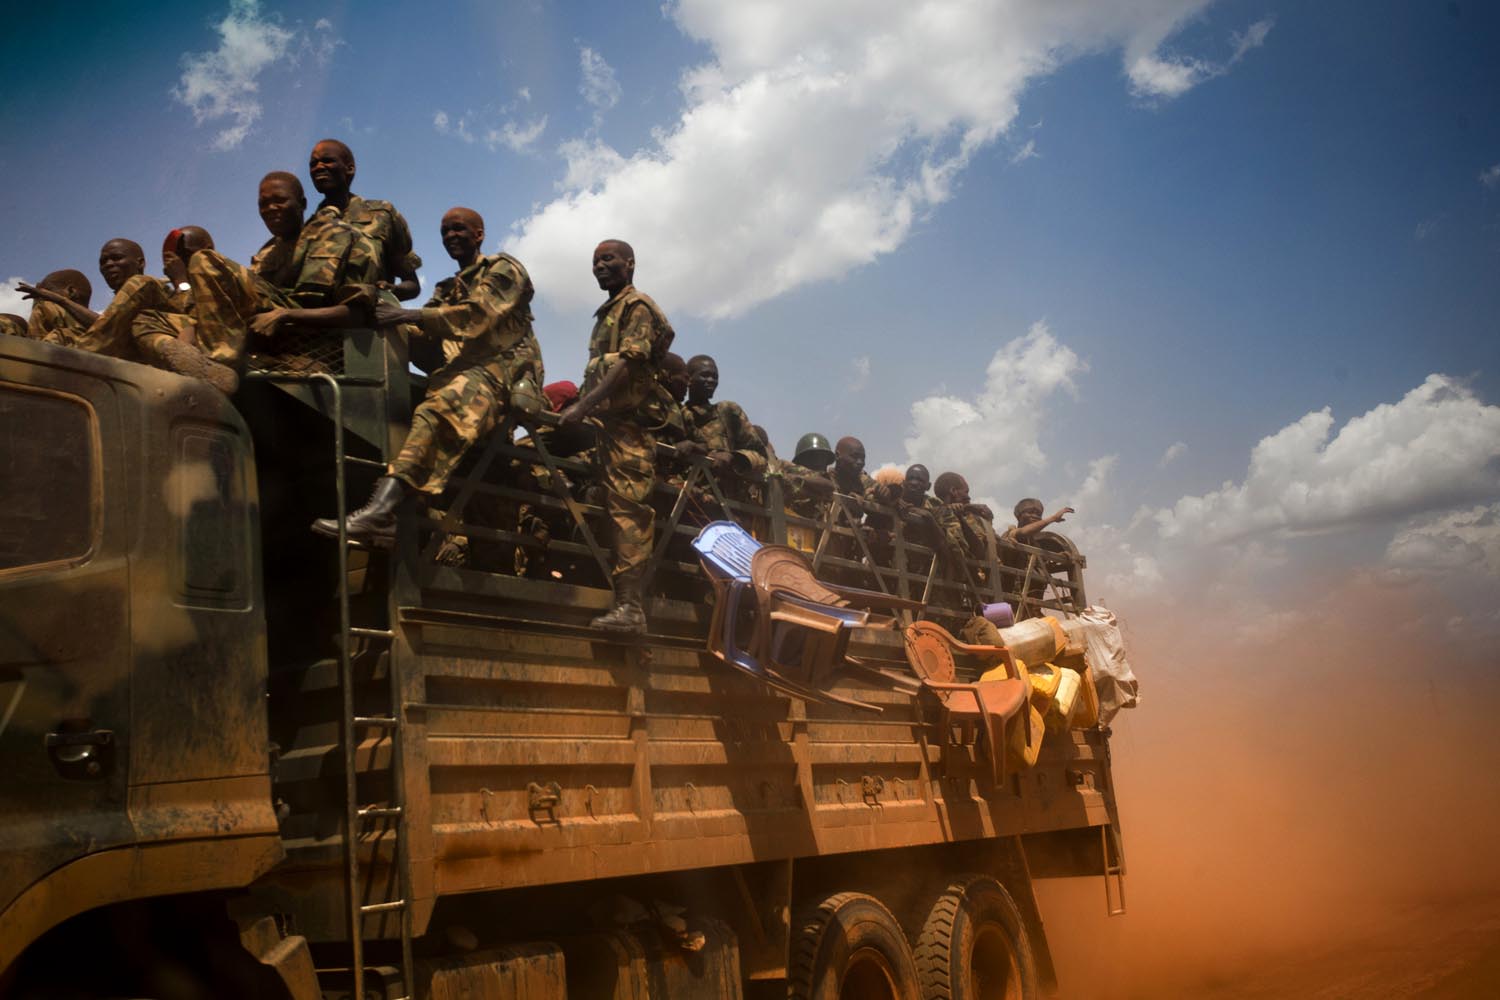 A truck filled with soldiers of the Sudan People's Liberation Army (SPLA), the military force of South Sudan, rushes toward the front line in mid-April.